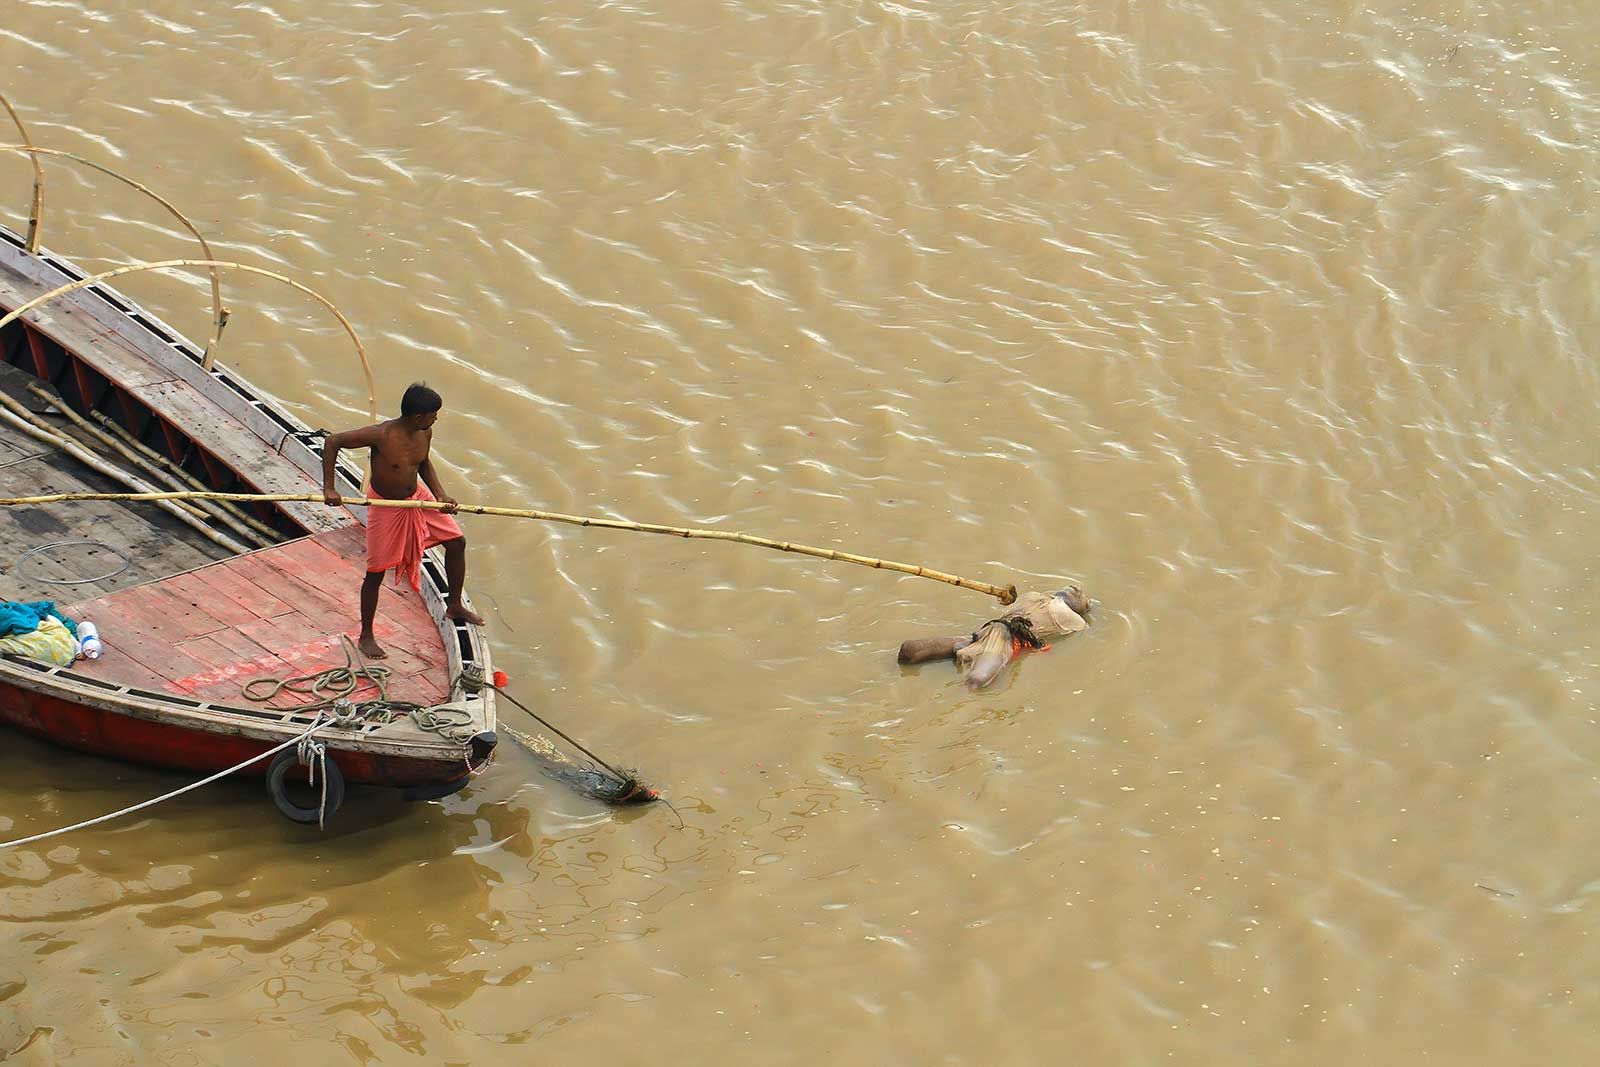 A dead body floating in the Ganges river in Varanasi, India.